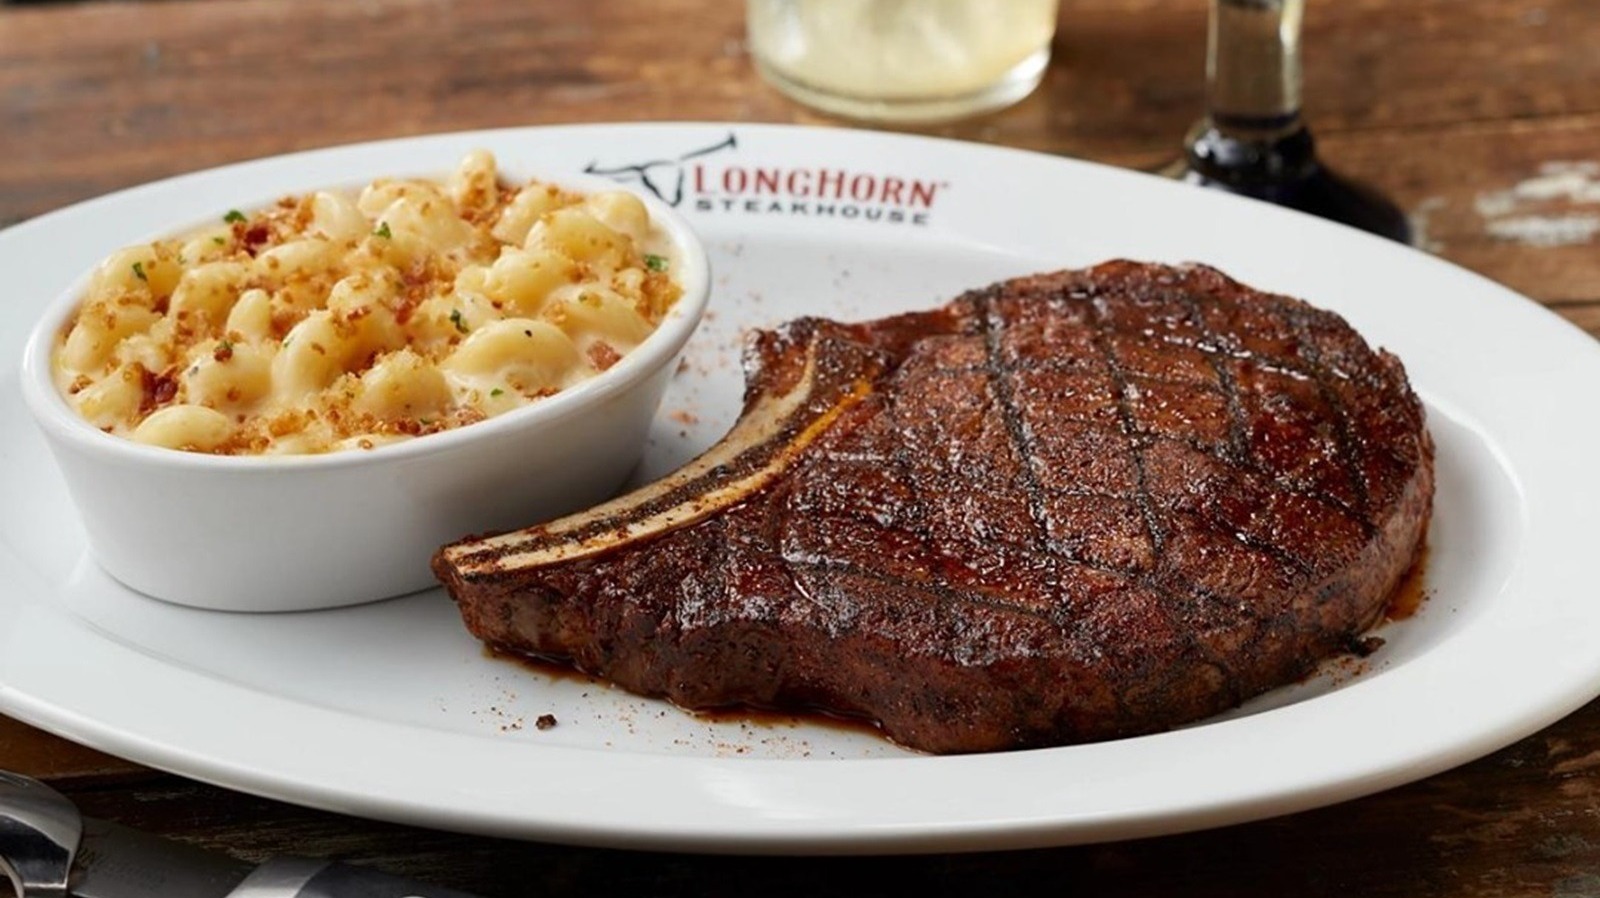 https://www.thedailymeal.com/img/gallery/14-secrets-about-longhorn-steakhouse-youll-wish-you-knew-sooner/l-intro-1699034243.jpg